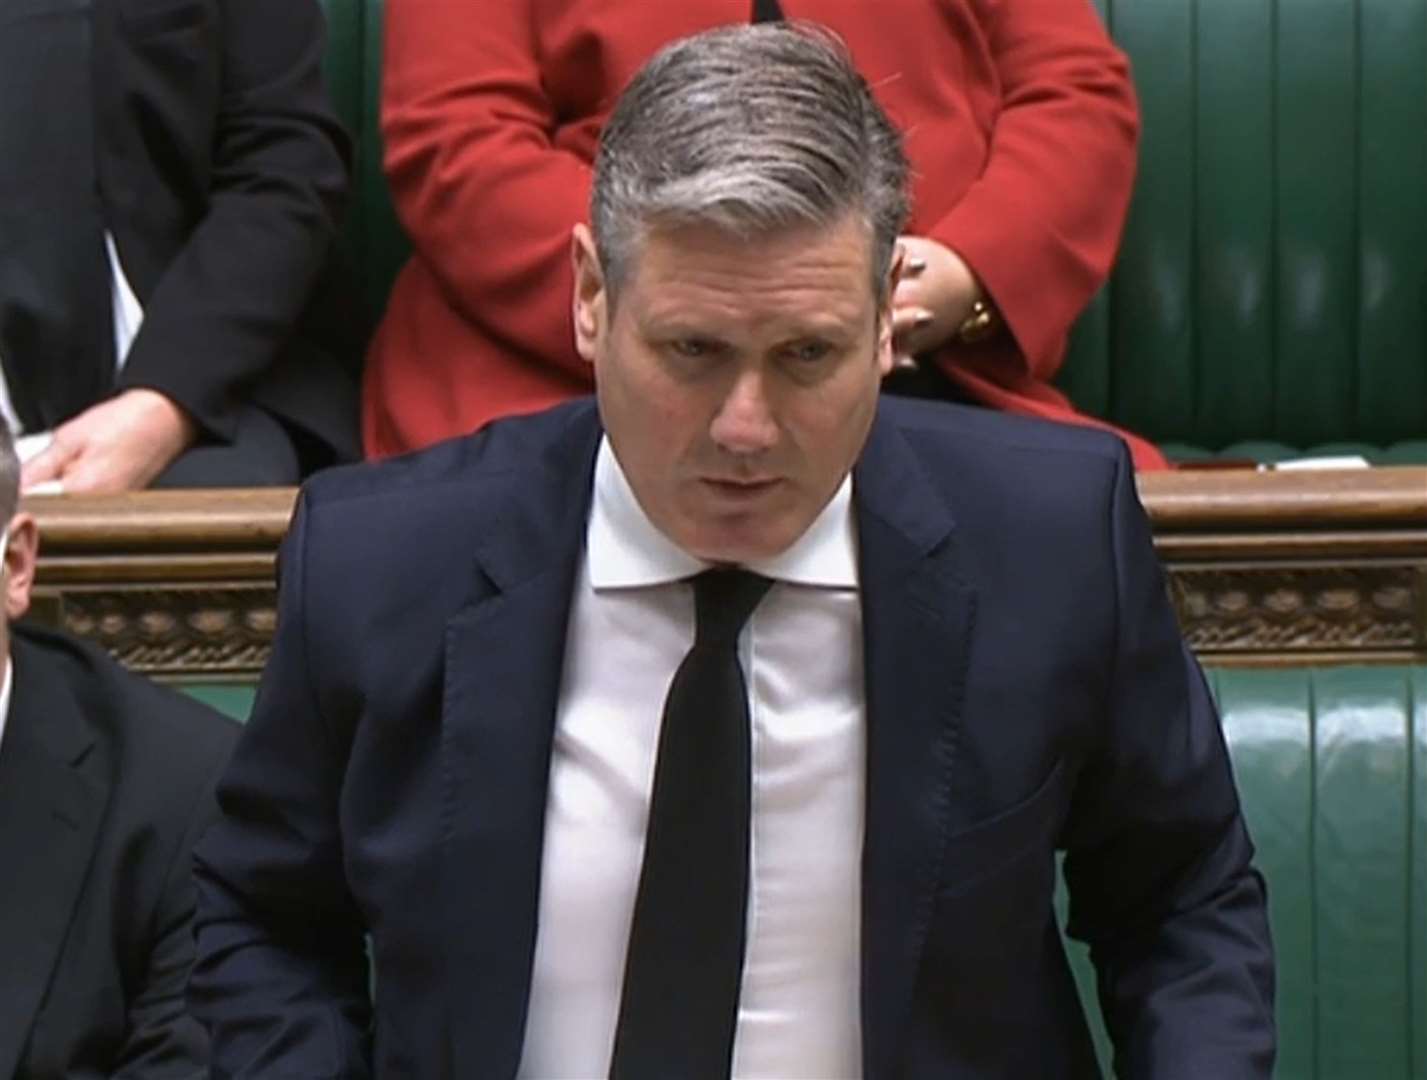 Labour leader Keir Starmer speaks during Prime Minister’s Questions in the House of Commons (PA)